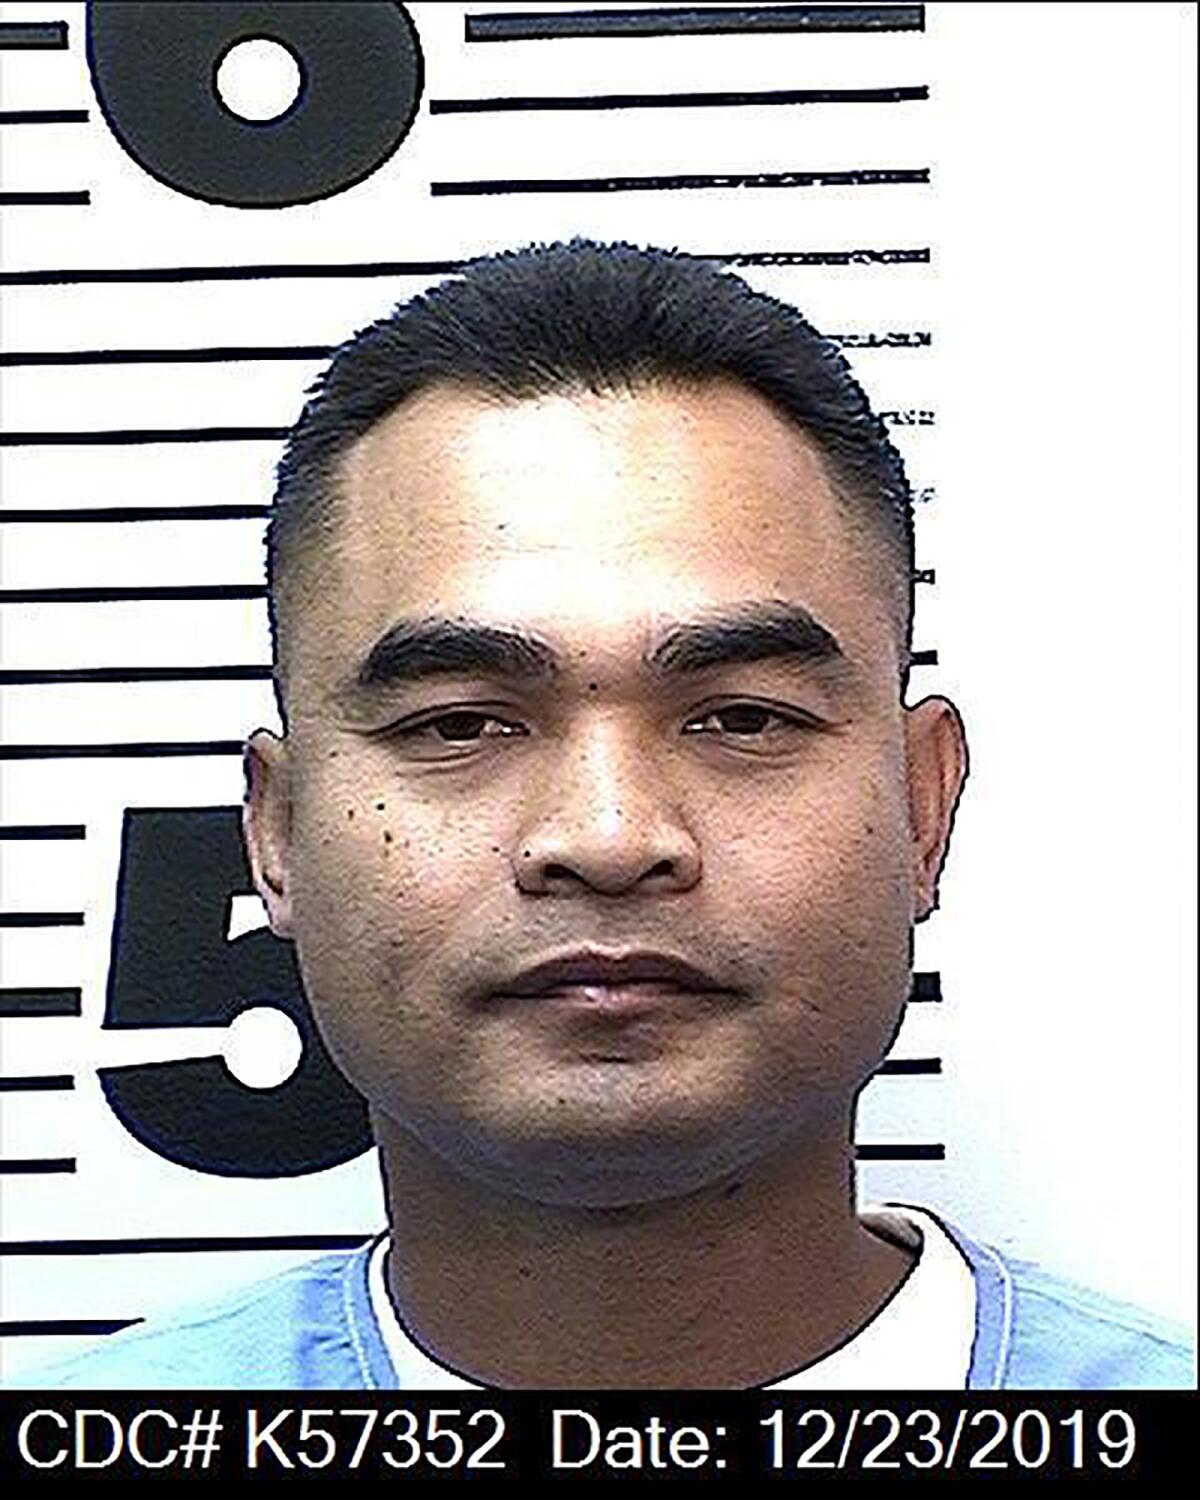 Tith Ton, who spent 22 years in prison, was released Monday on parole and immediately turned over to federal agents for possible deportation, according to his attorney.